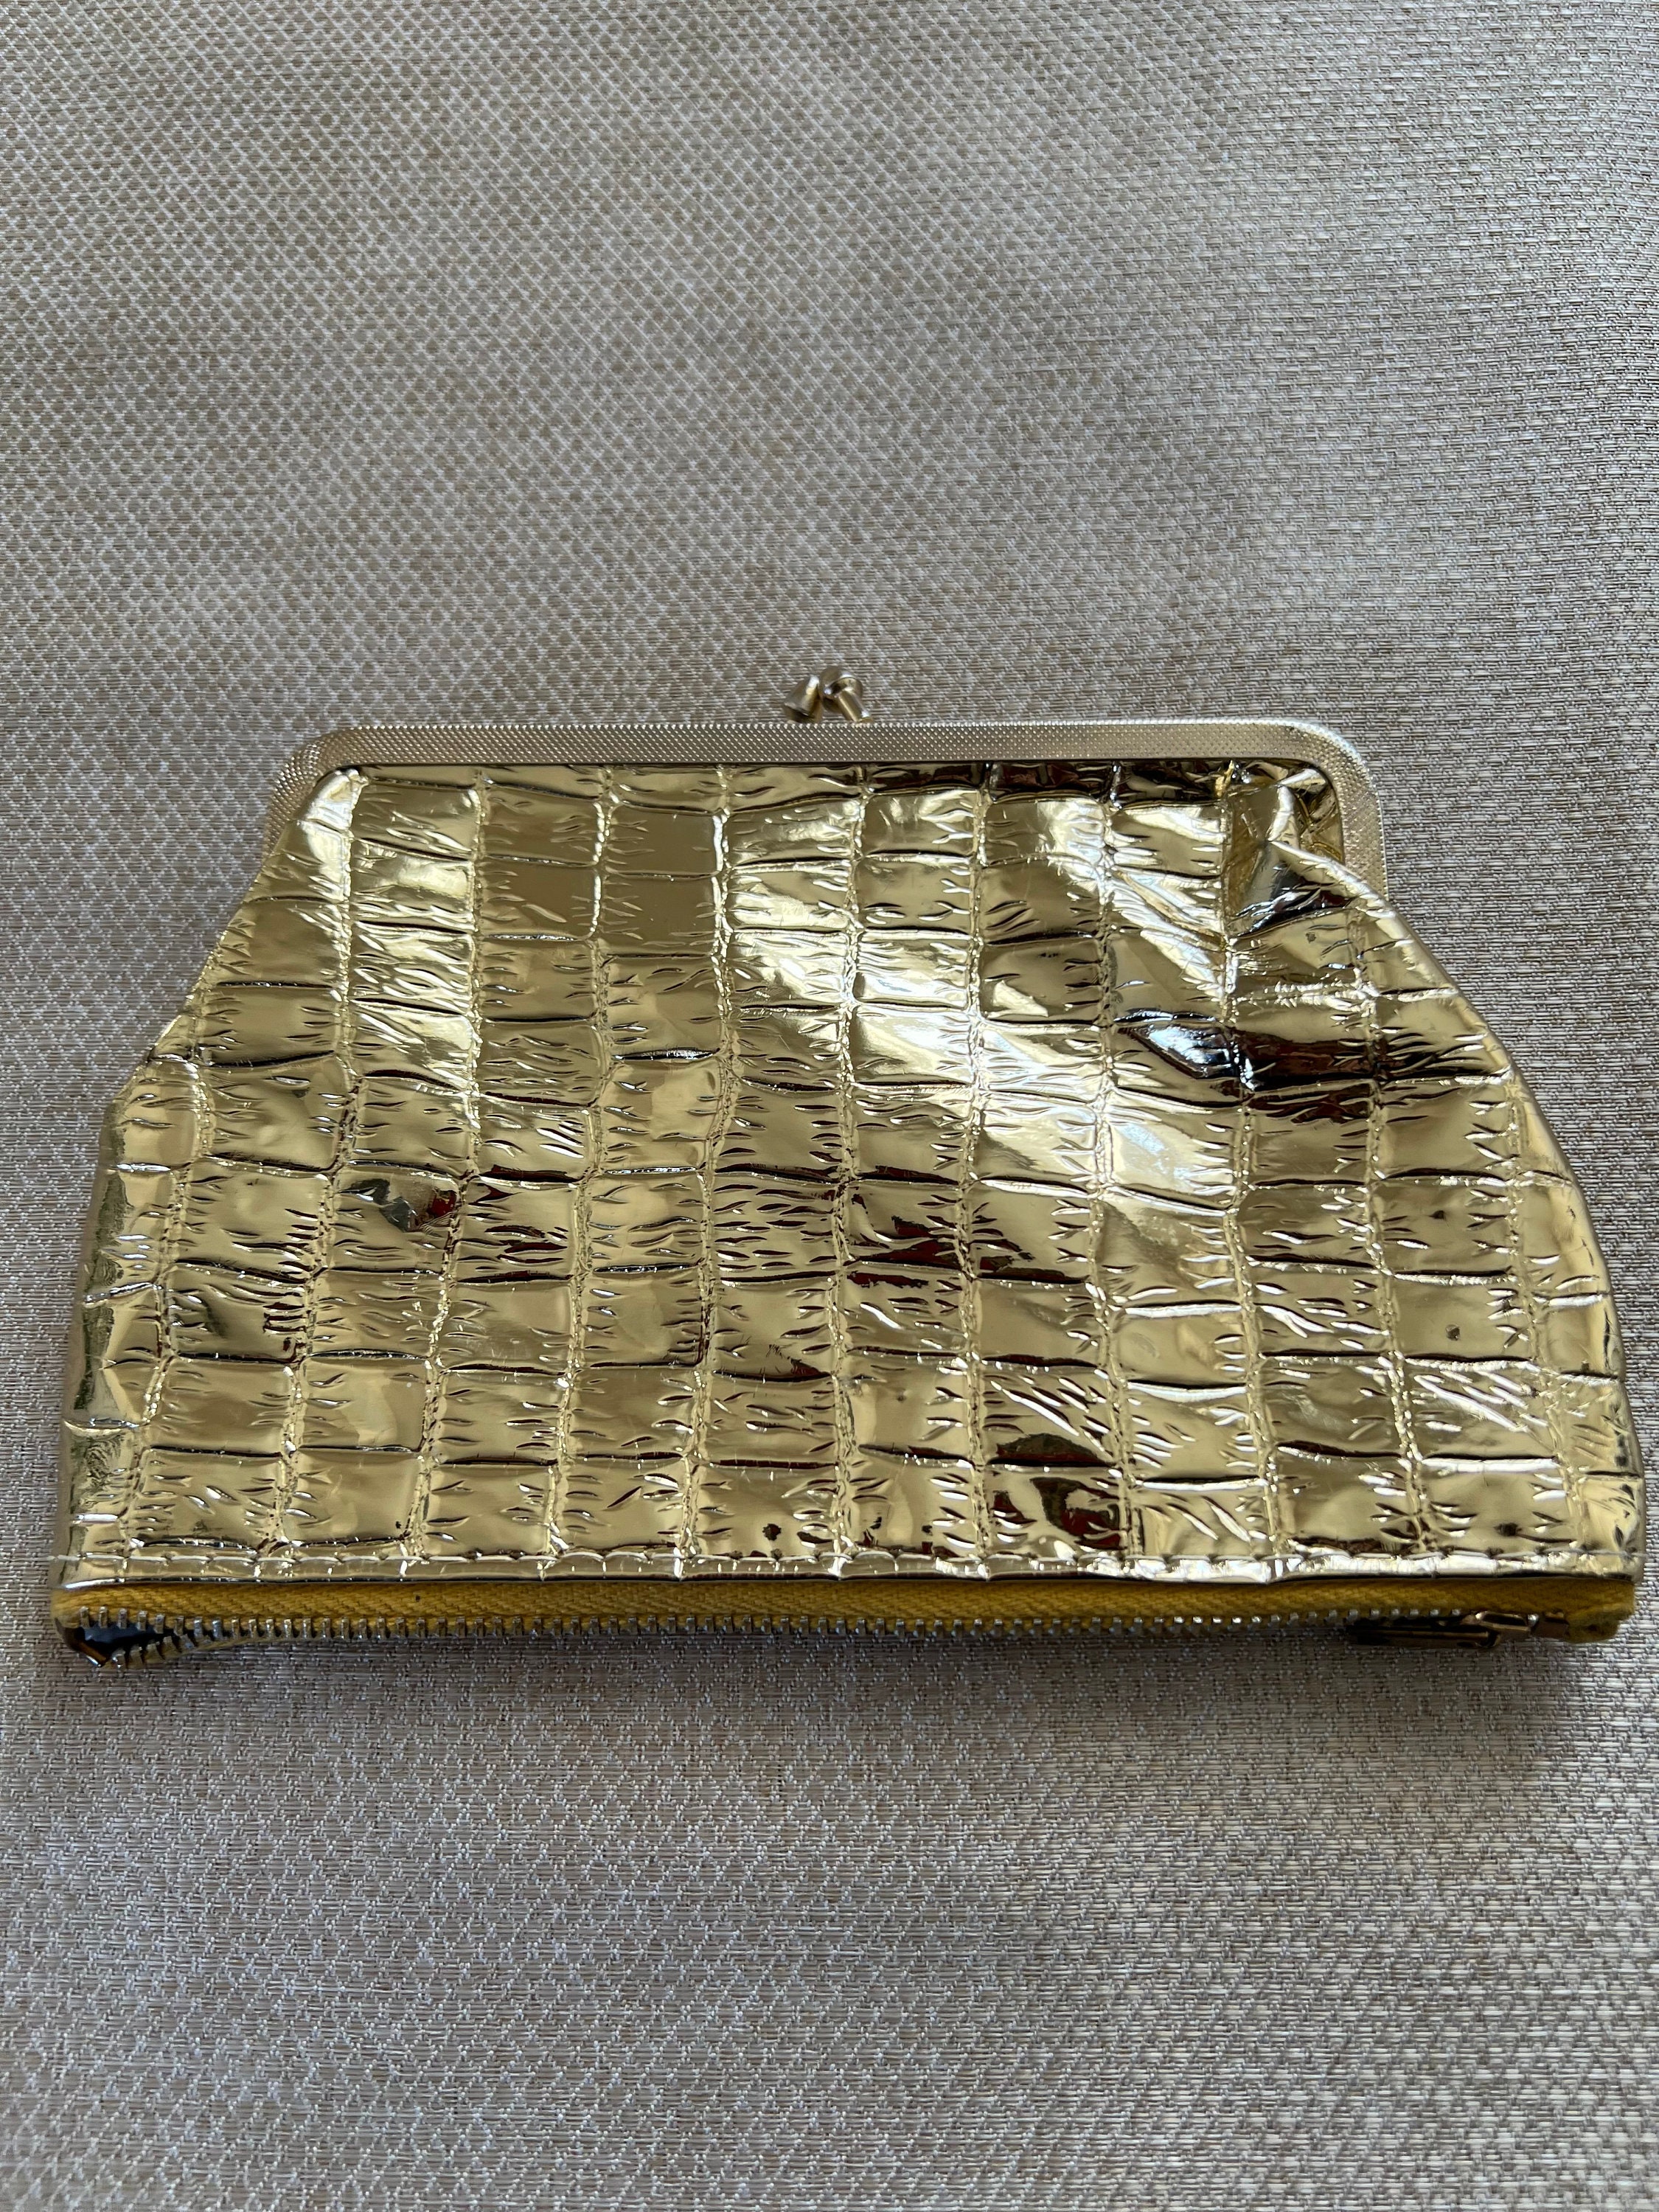 A variety of chick kiss mouth gold bag coin purse cosmetic bag